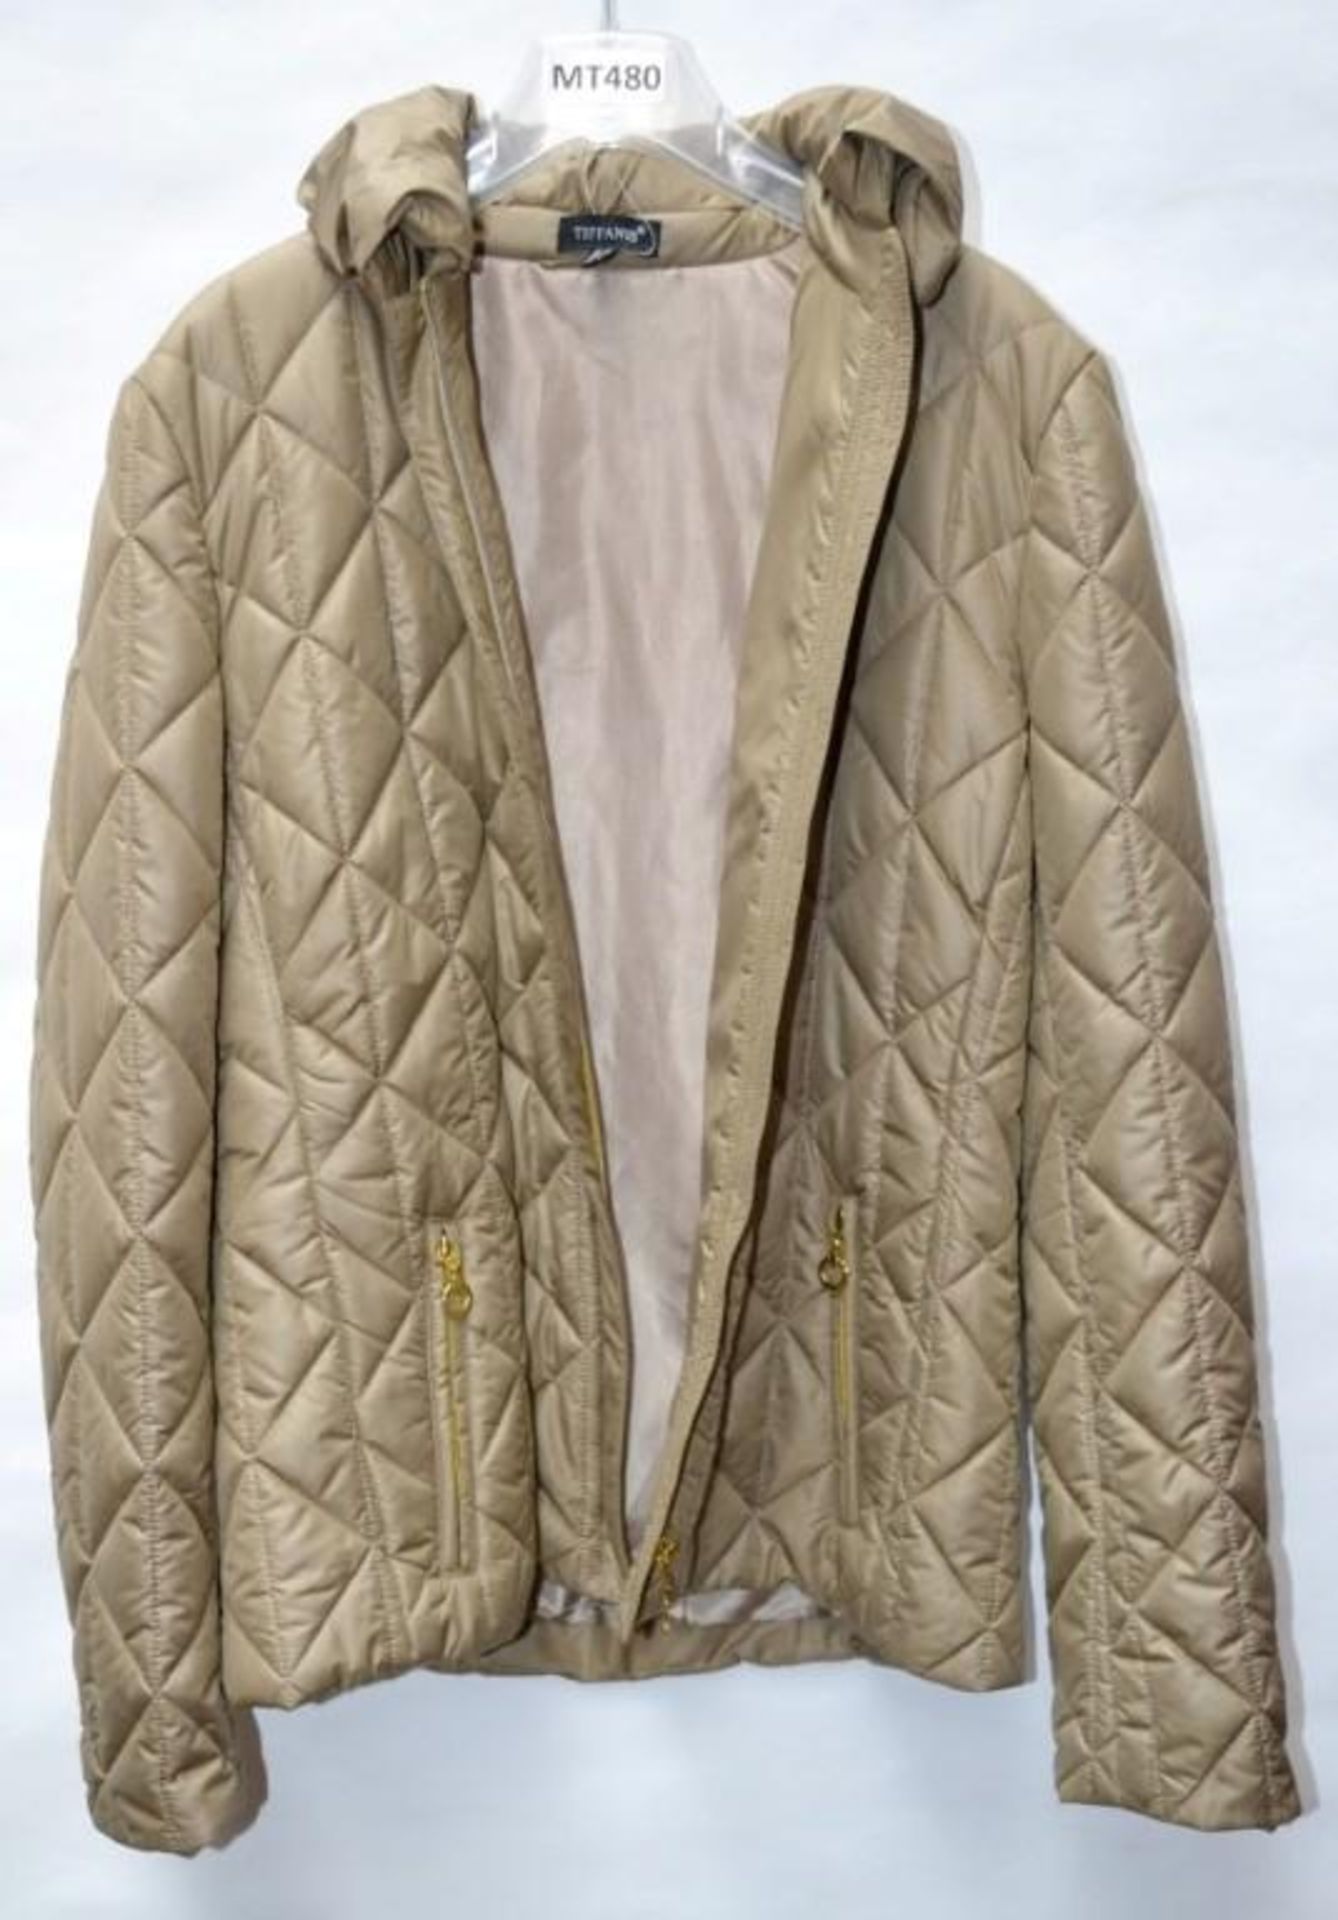 1 x Steilmann Womens Padded Coat With Concealed Hood In Collar - Colour: Bronzed Beige - UK Size 12 - Image 3 of 4